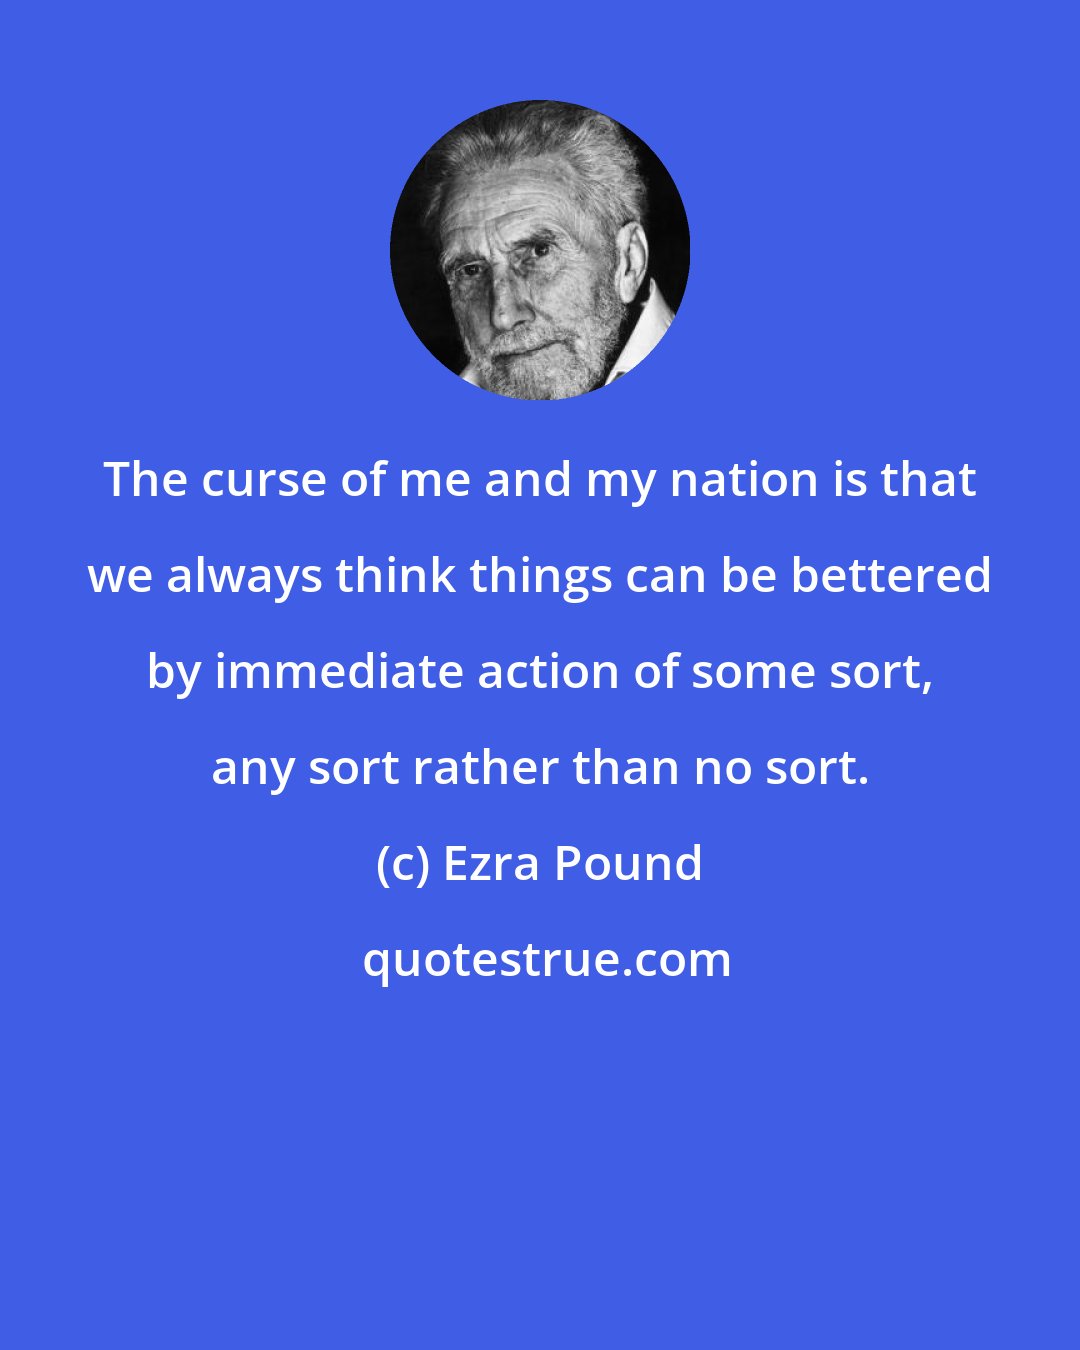 Ezra Pound: The curse of me and my nation is that we always think things can be bettered by immediate action of some sort, any sort rather than no sort.